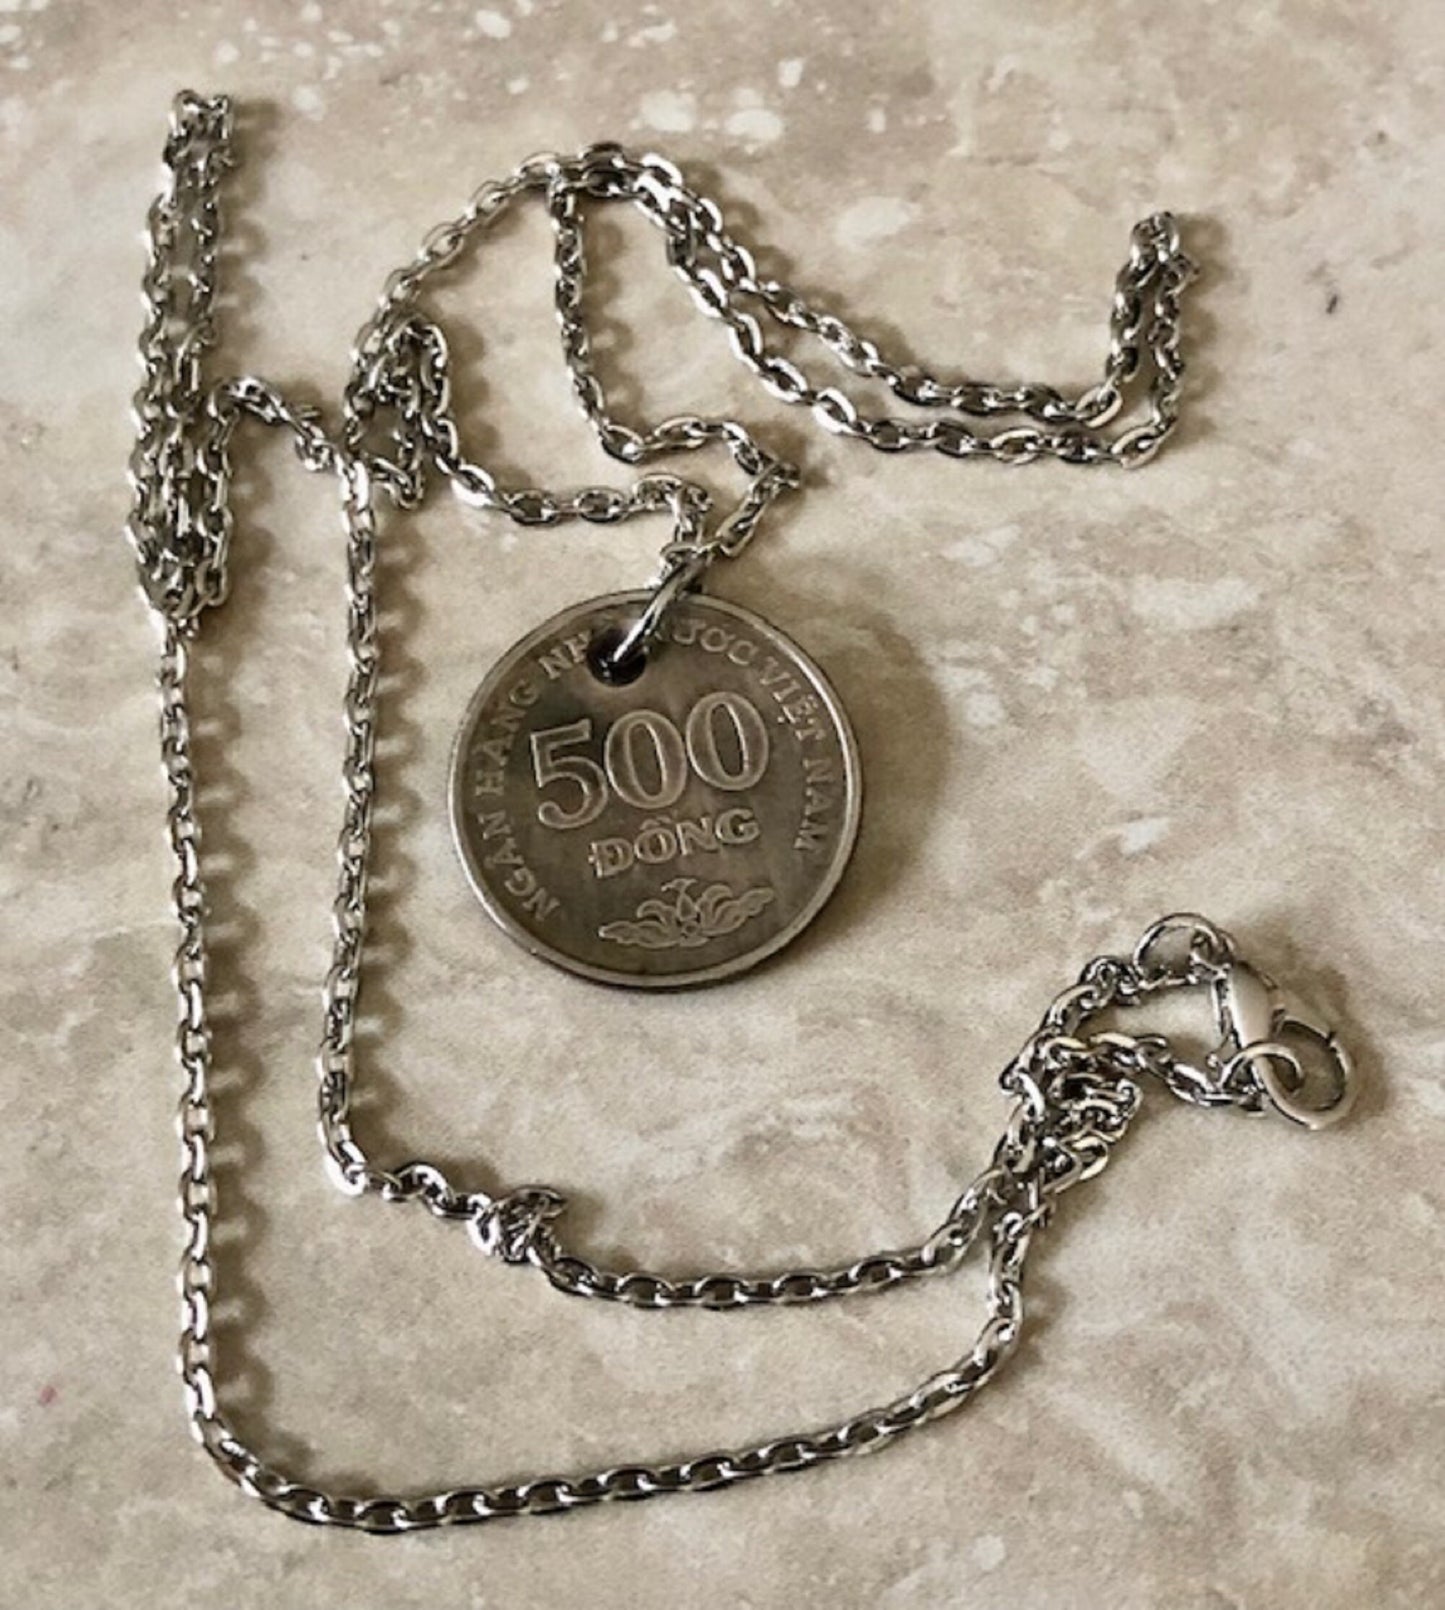 Viet Nam Coin Necklace 500 Dong Coin Hoa Pendant Personal Necklace Old Handmade Jewelry Gift Friend Charm For Him Her World Coin Collector